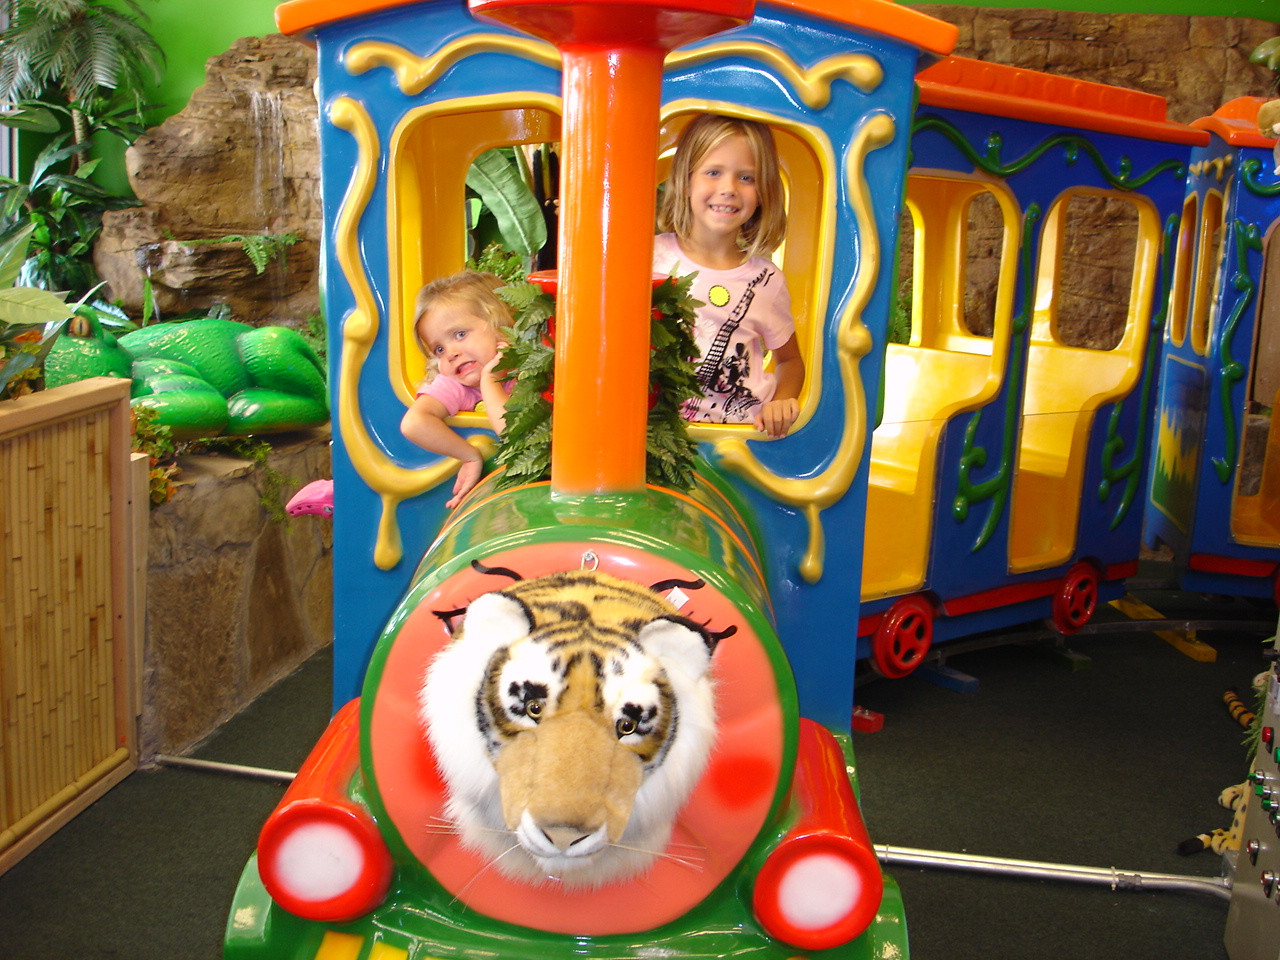 Indoor Party Places For Kids Near Me Best Of Kids Play Places Things To Do Near Me For Free Fun Of Indoor Party Places For Kids Near Me 